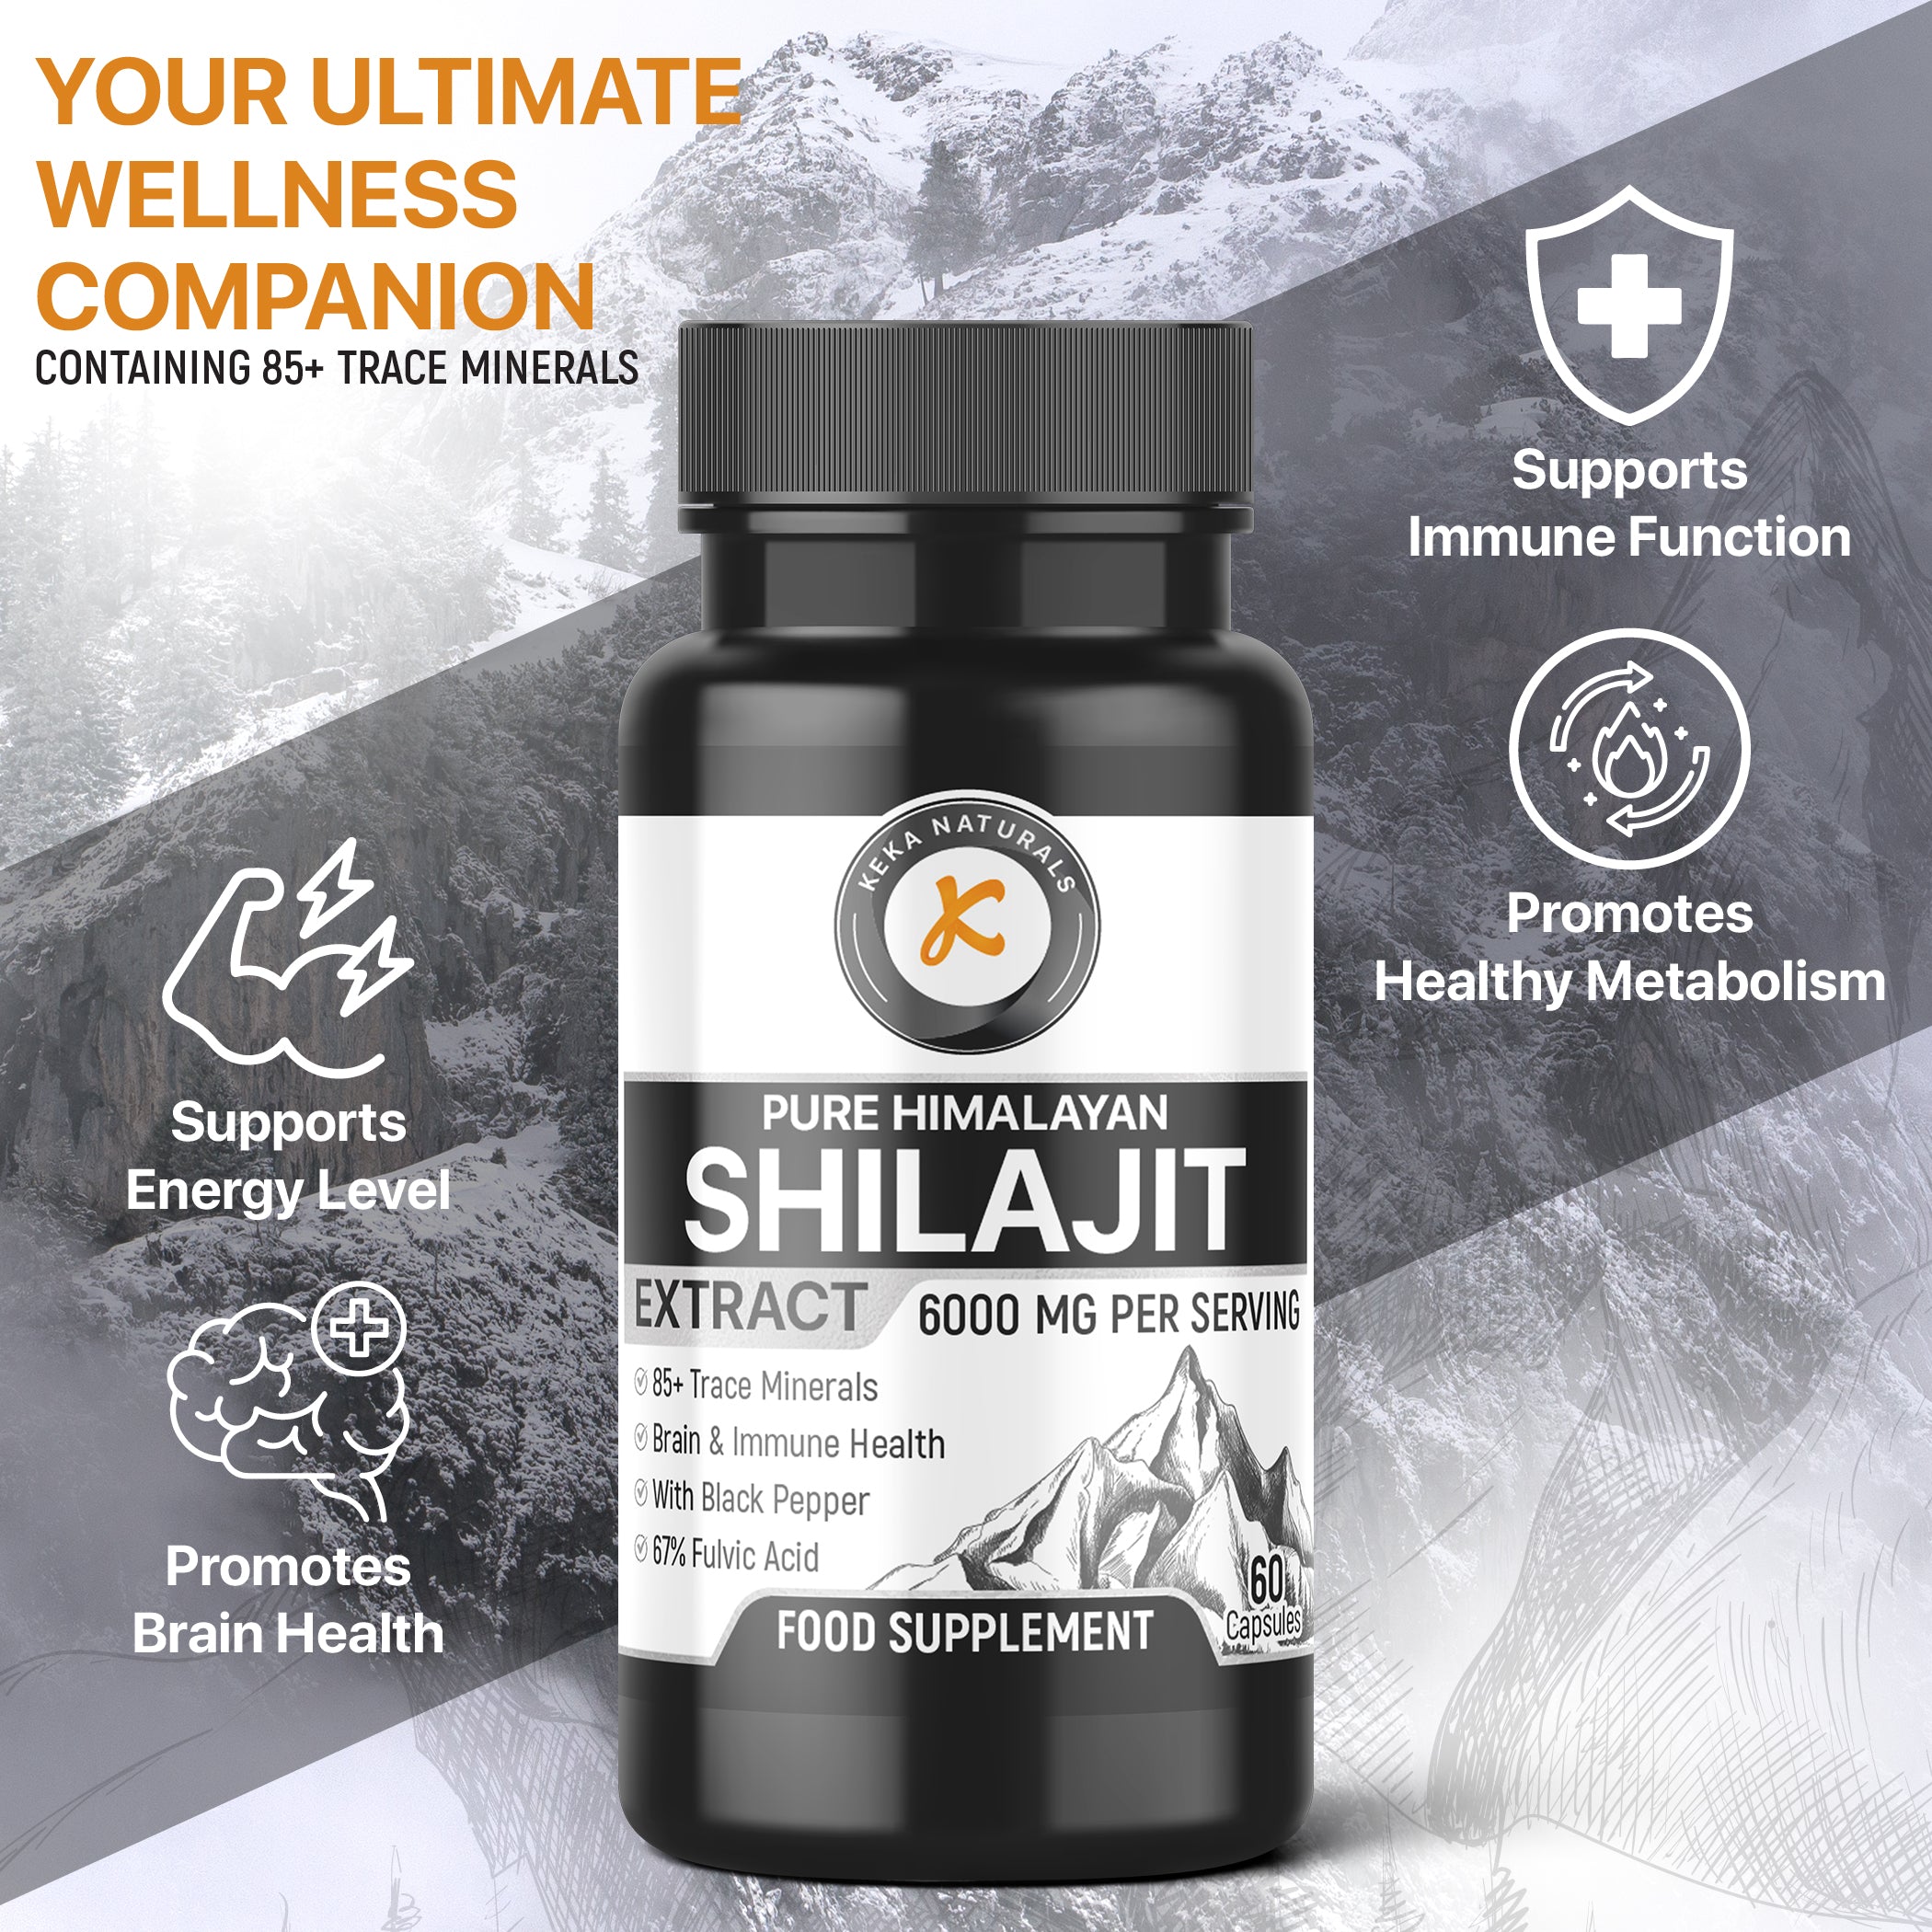 pure himalayan Shilajit Extract 6000mg containing 85+ trace minerals to promote energy levels and healthy metabolism